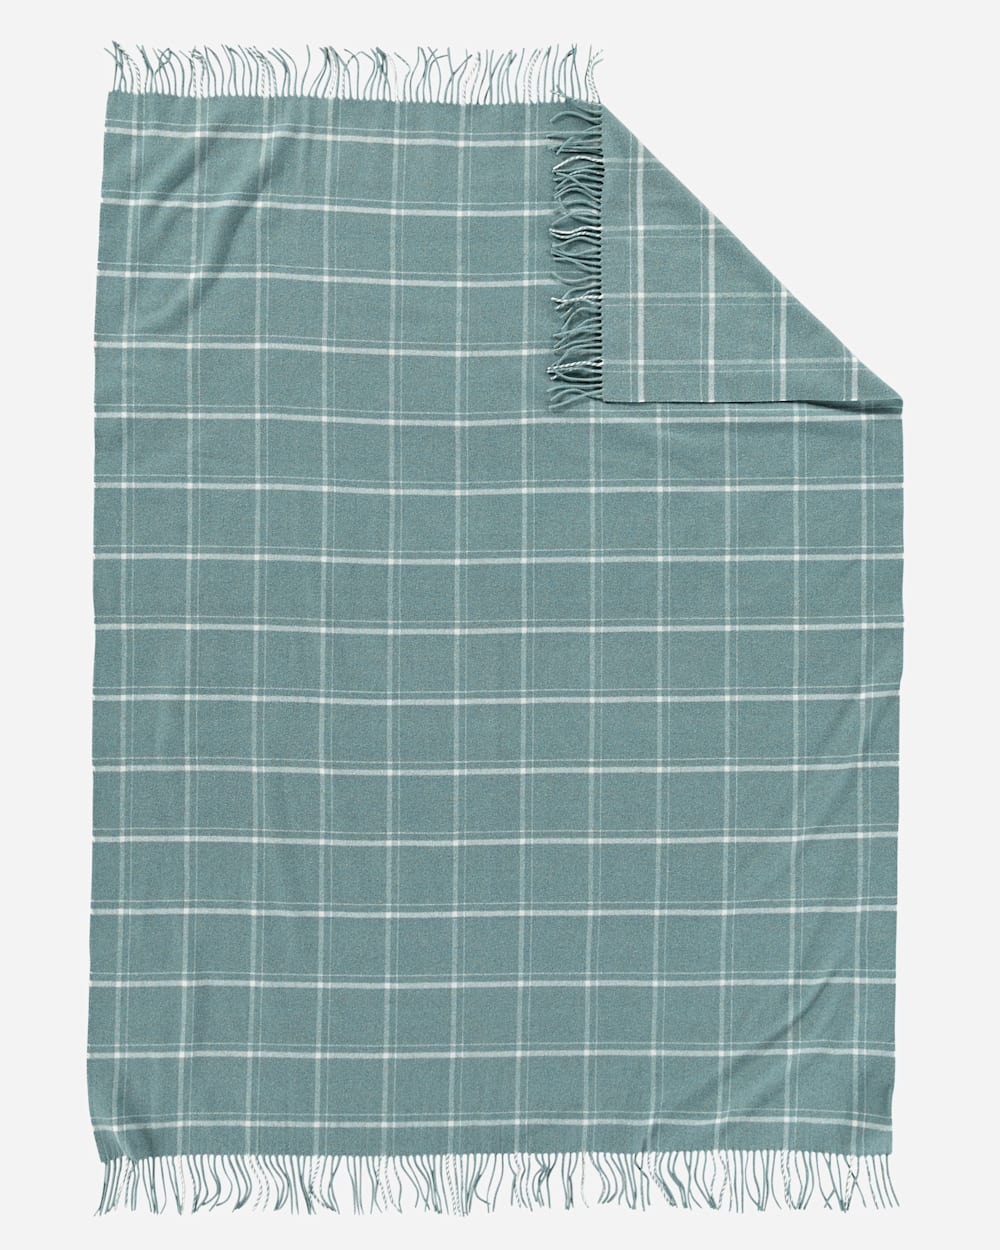 ADDITIONAL VIEW OF 5TH AVENUE WINDOWPANE MERINO THROW IN SHALE image number 2